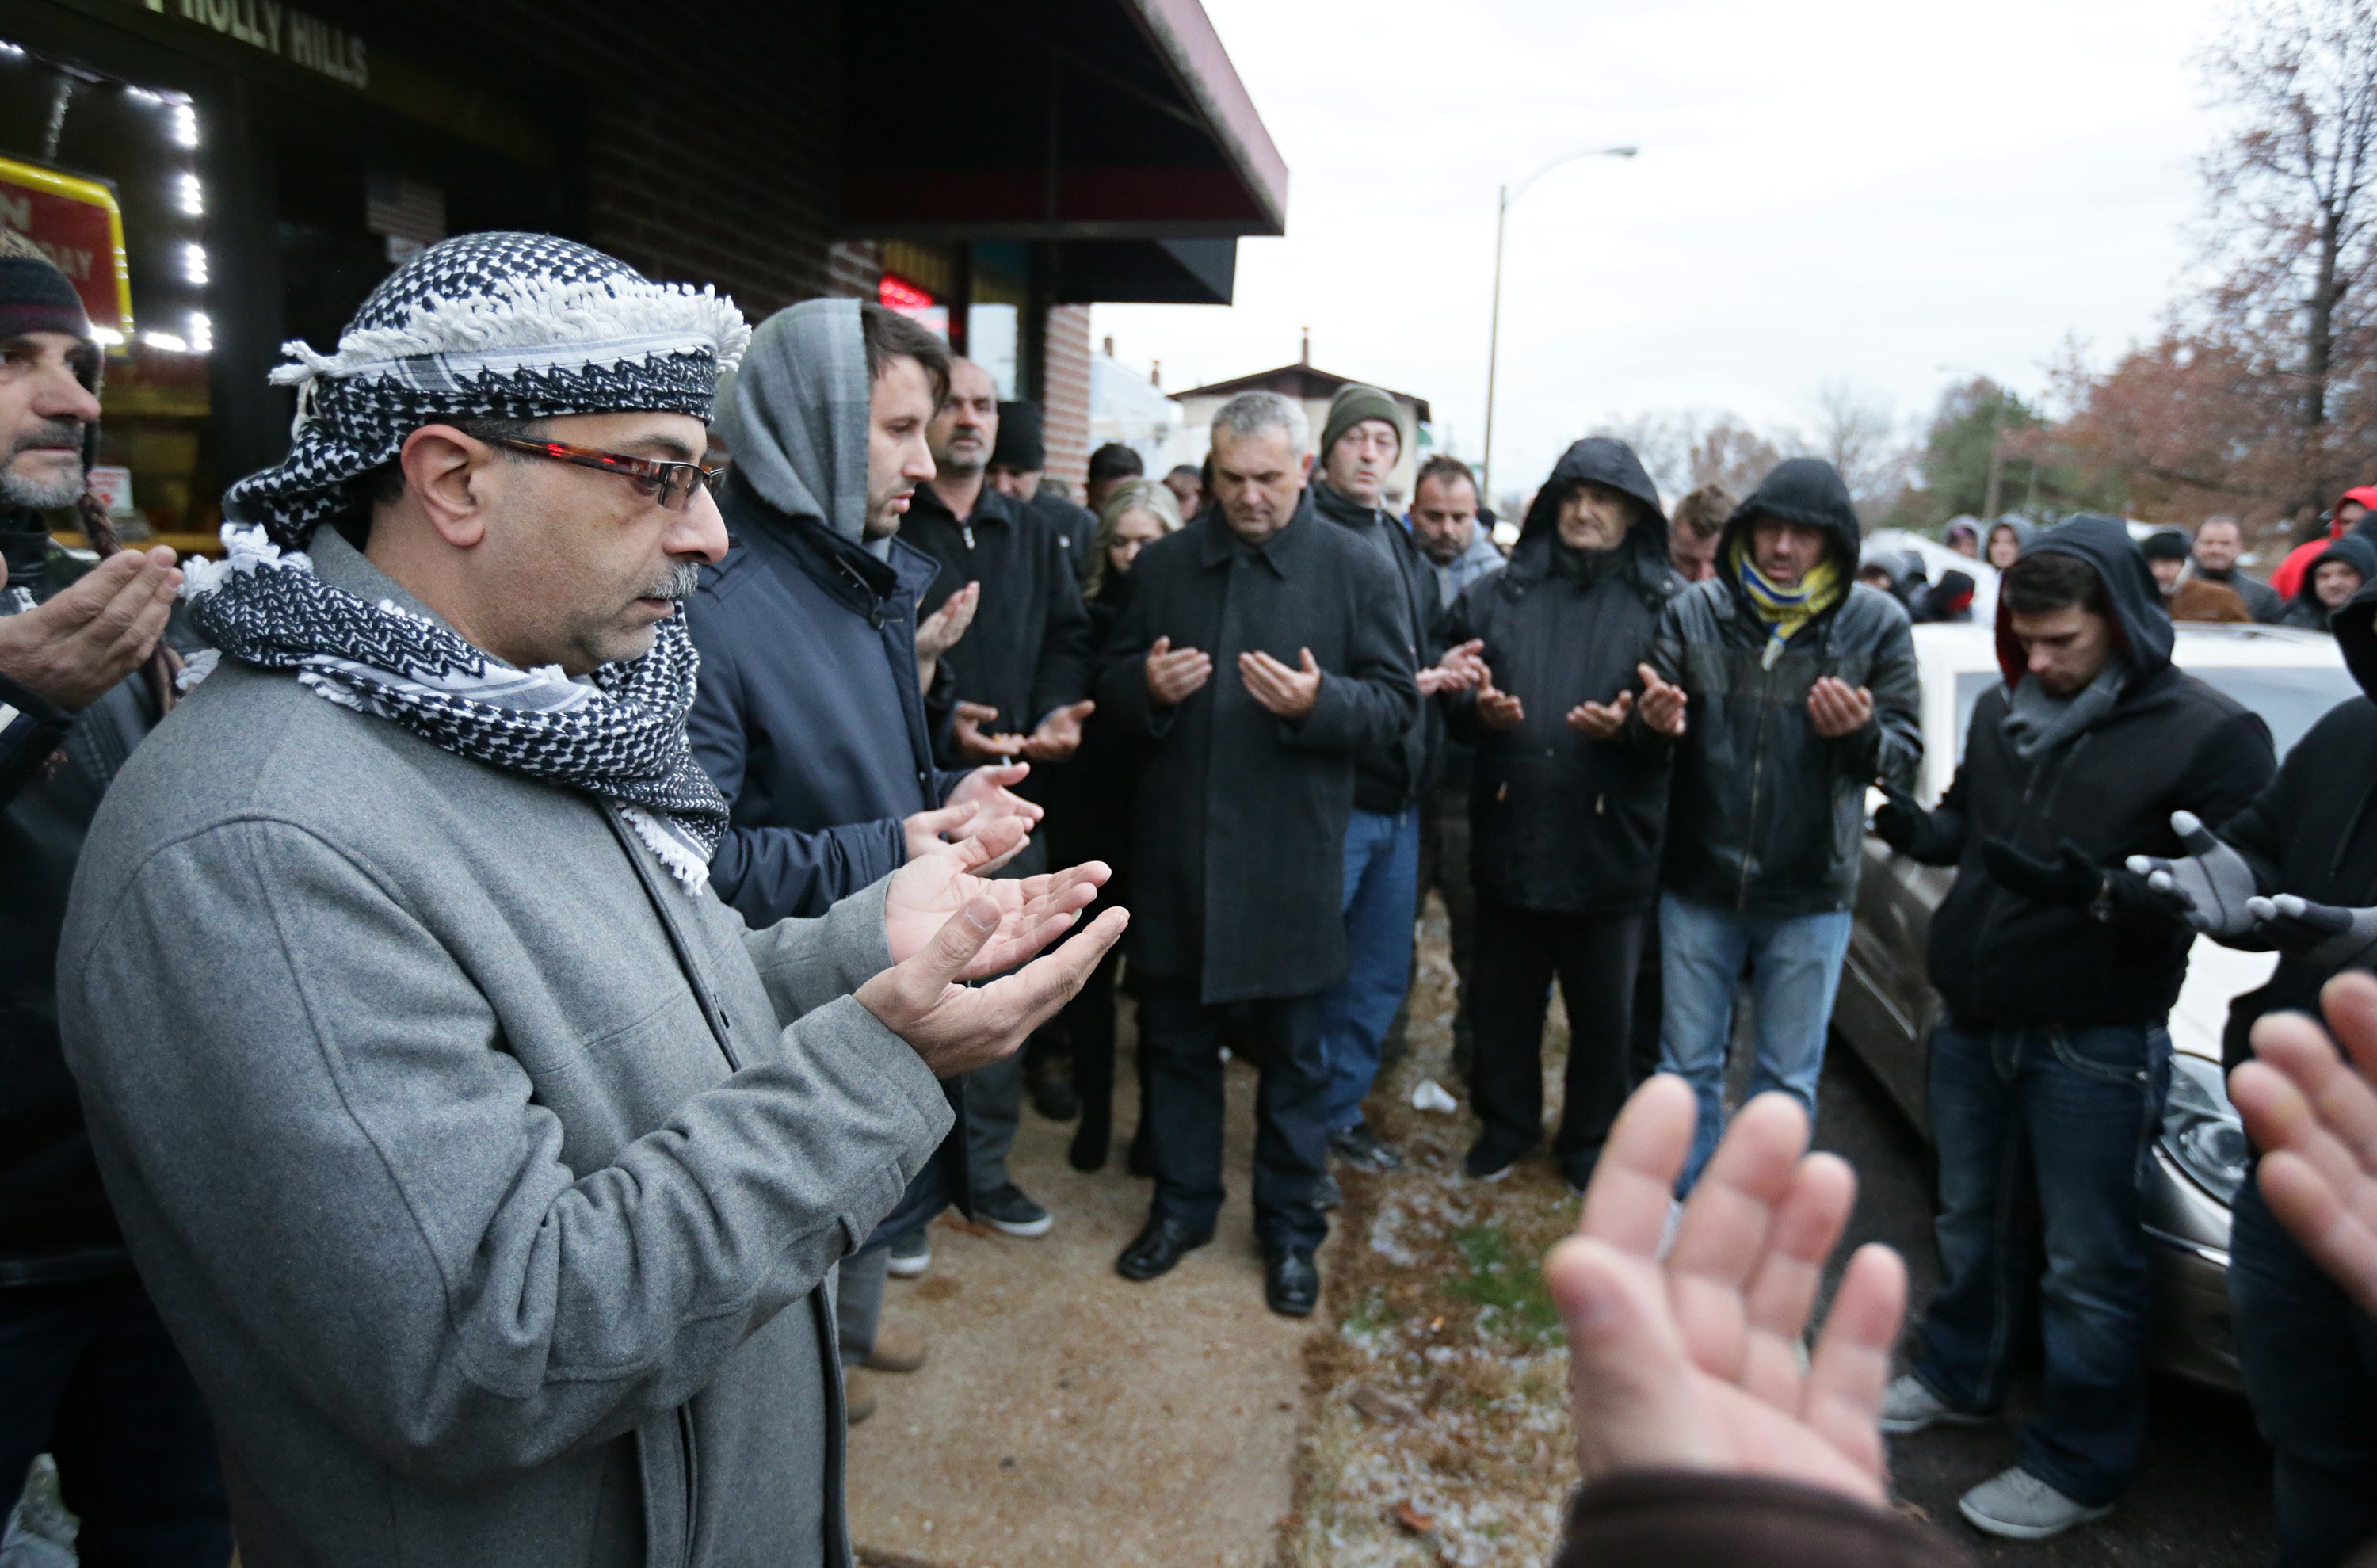 Zuhdi Masri, left, prays for murder victim Zemir Begic with a group of other Bosnians gathered on Holly Hills Avenue in St. Louis on Dec. 1, 2014. (David Carson—AP)